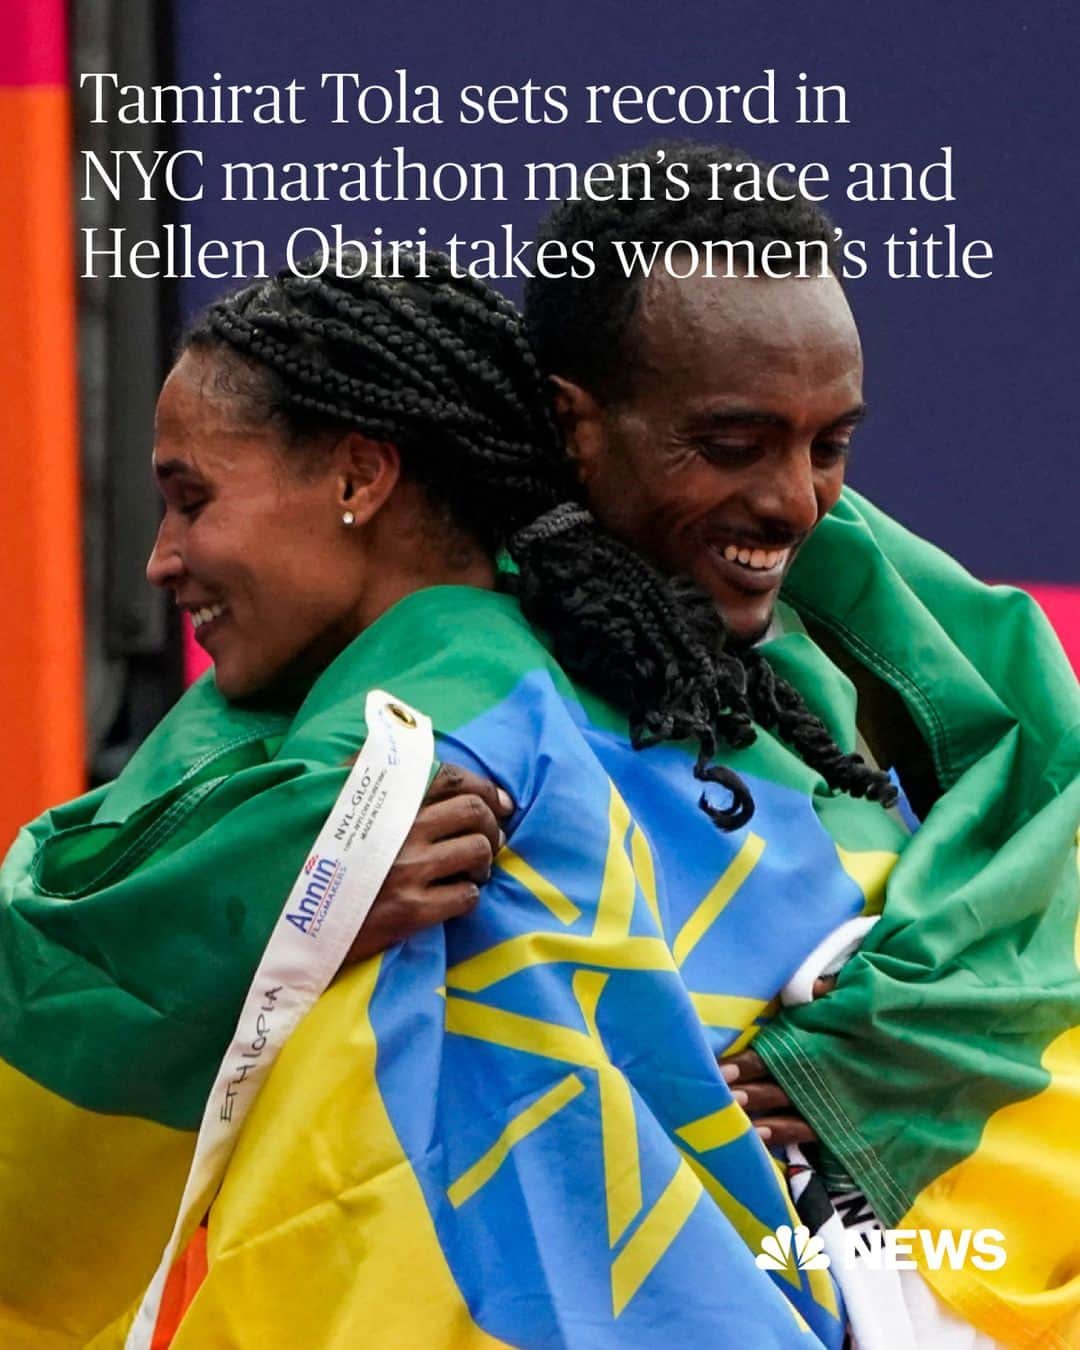 NBC Newsのインスタグラム：「Tamirat Tola of Ethiopia set a course record to win the New York City Marathon men’s race on Sunday while Hellen Obiri of Kenya pulled away in the final 400 meters to take the women’s title.  Marcel Hug won the men’s wheelchair race, the Swiss star’s record-extending sixth NYC Marathon victory.  Catherine Debrunner of Switzerland won her New York debut, shattering the course record in the women’s wheelchair race.   “It’s difficult to describe in words. I said to my coach if I win this race, it’s the best performance I ever showed,” she said. “Knew it’s the toughest marathon of all. It was the first time. I knew it was going to be so tough.”  Read more at the link in bio.」